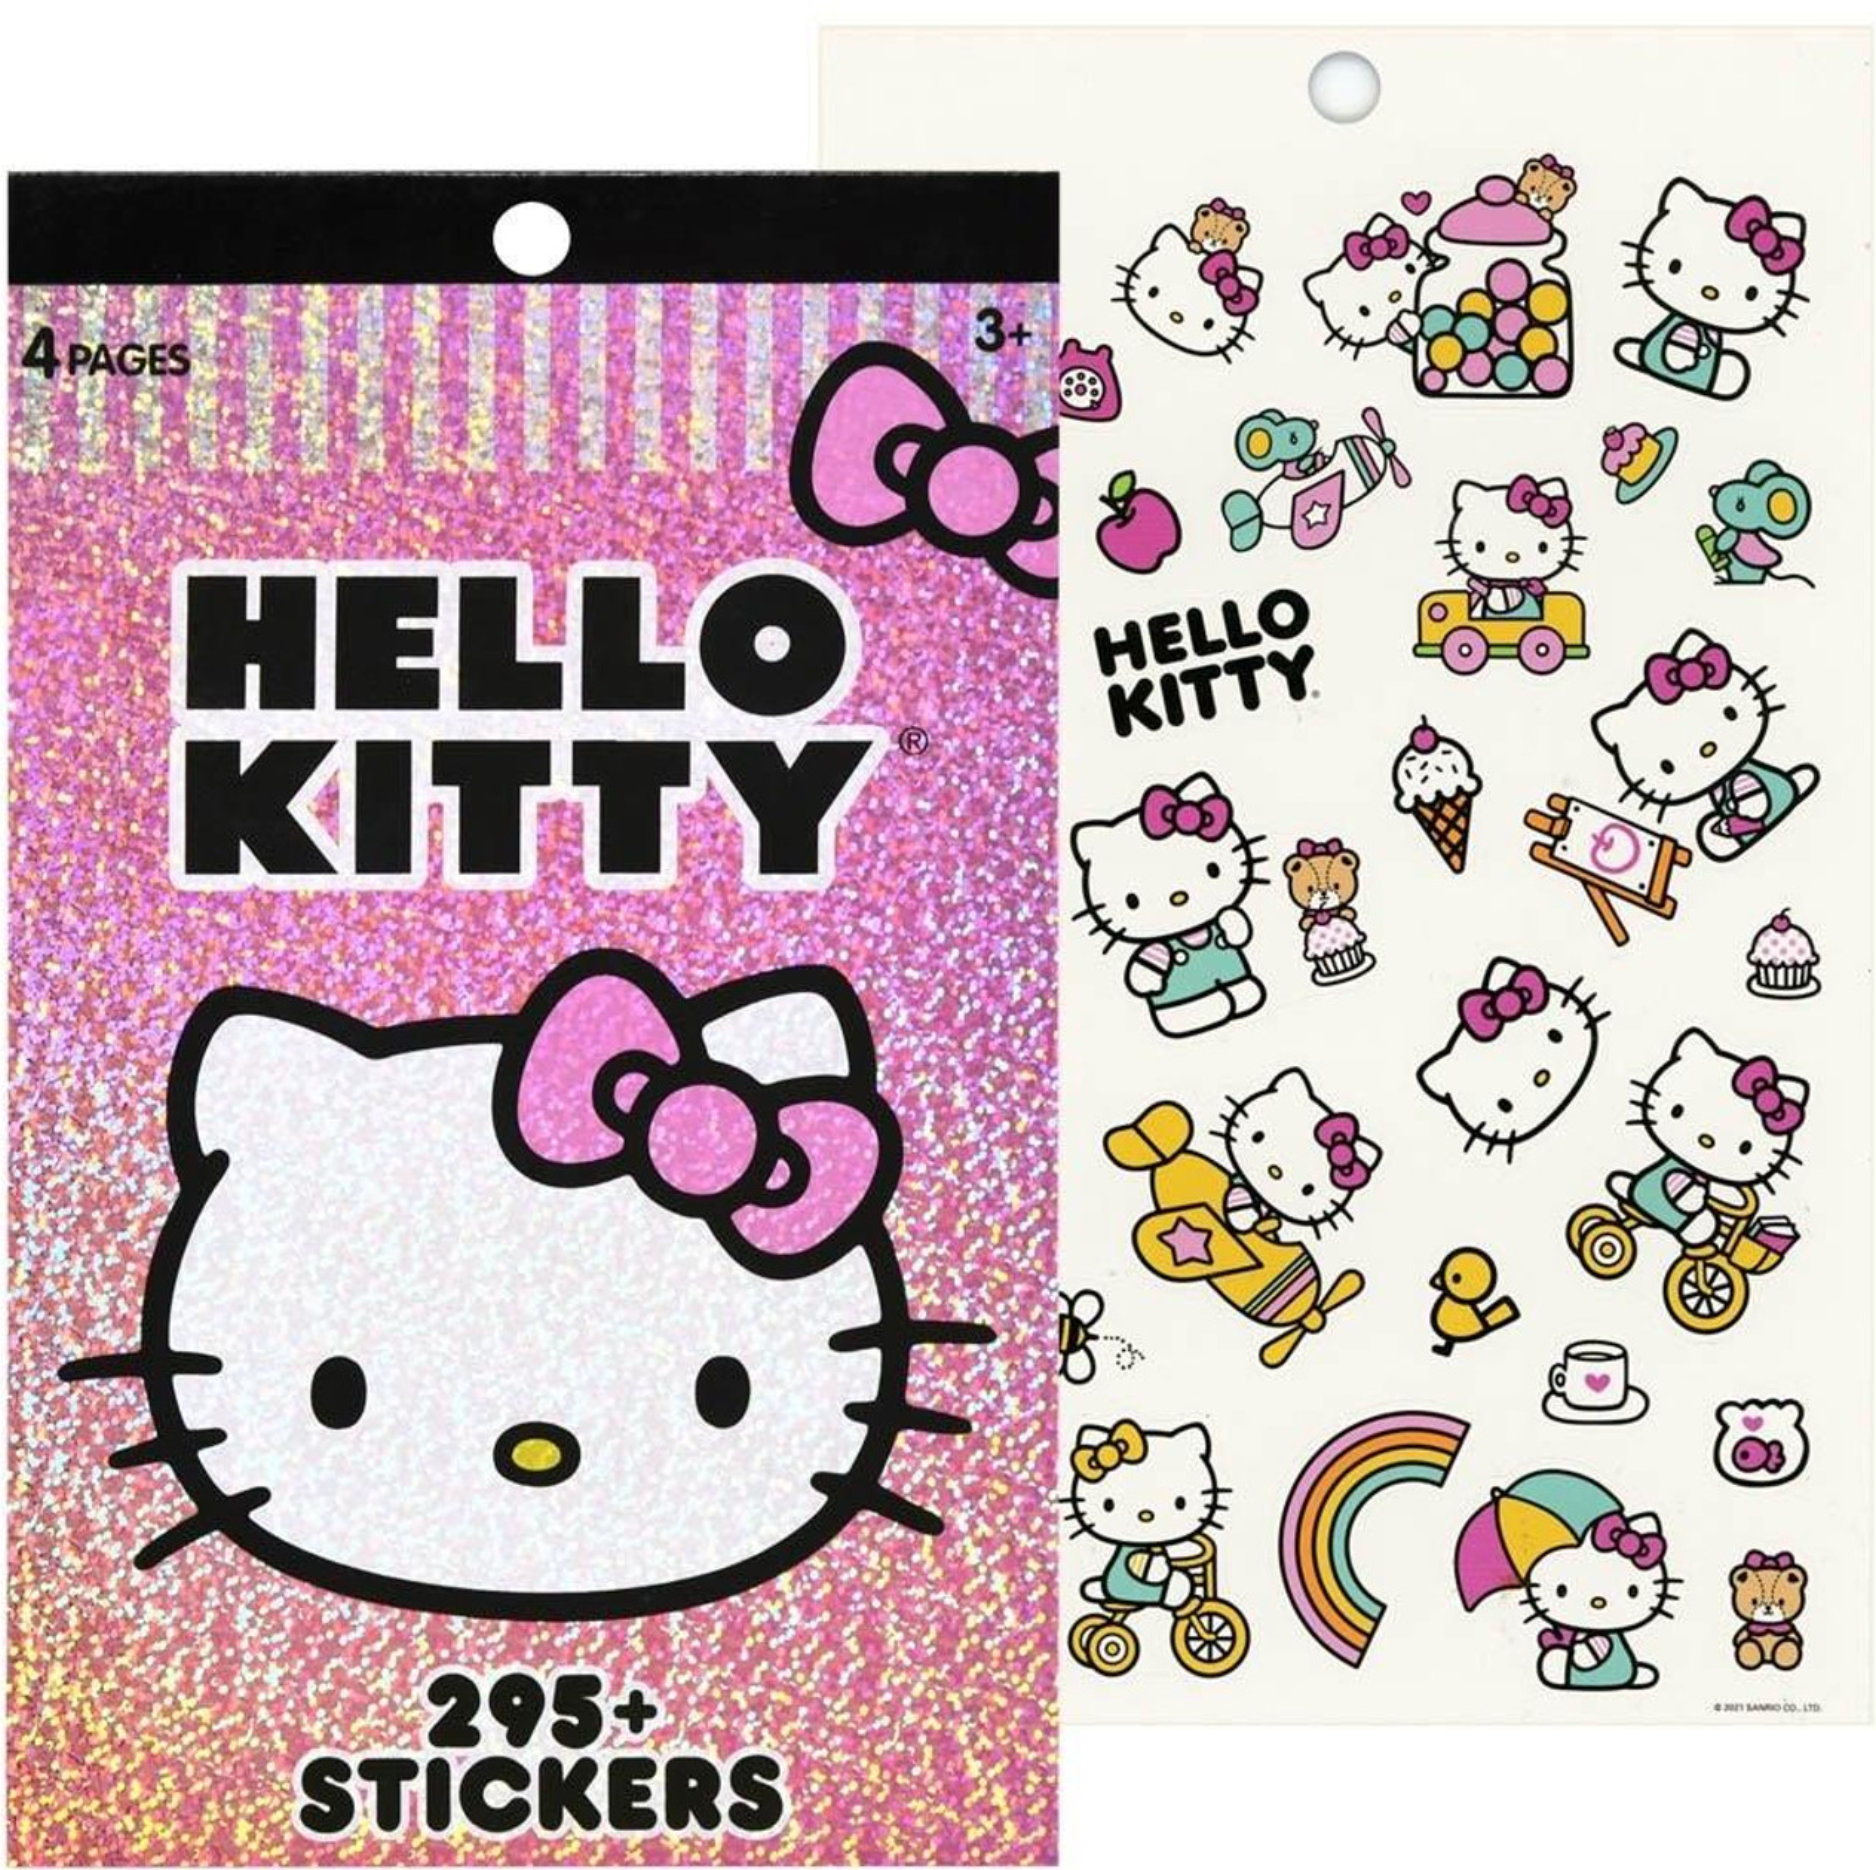 Hello Kitty 4 Sheet Foil Cover Sticker Pad with 200+ Stickers